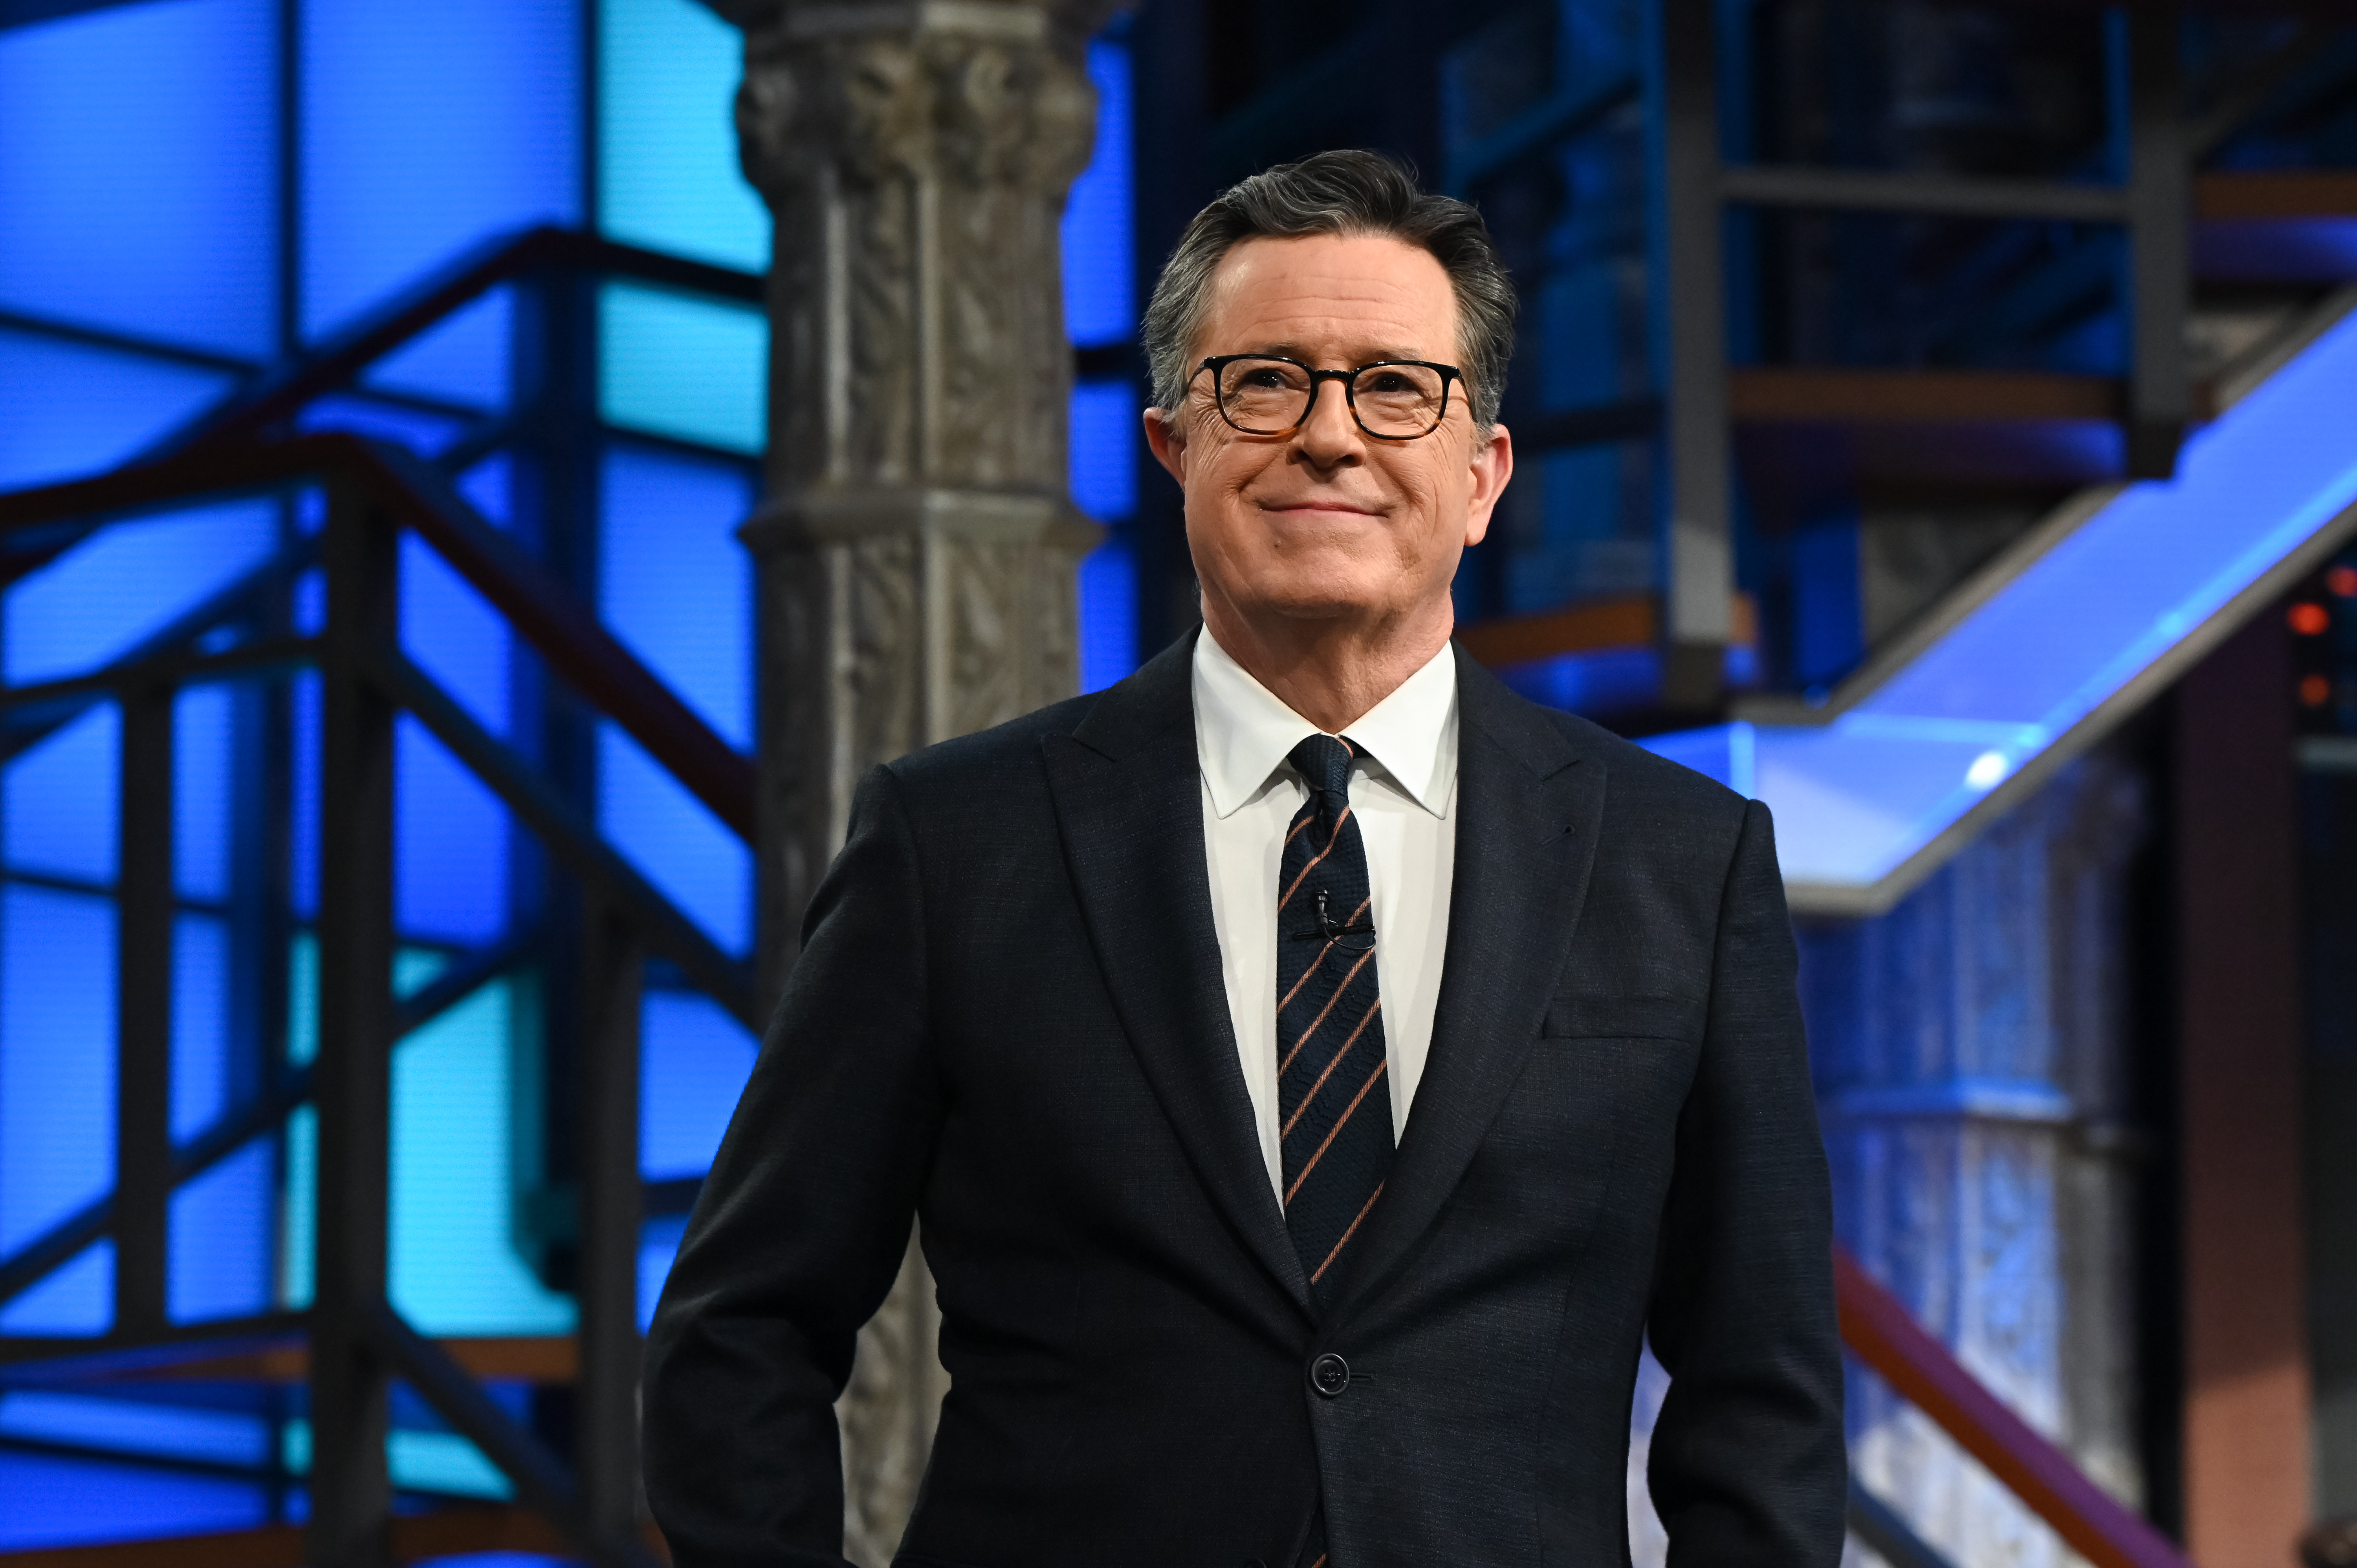 Stephen Colbert at "The Late Show with Stephen Colbert" on March 9, 2023, in New York | Source: Getty Images